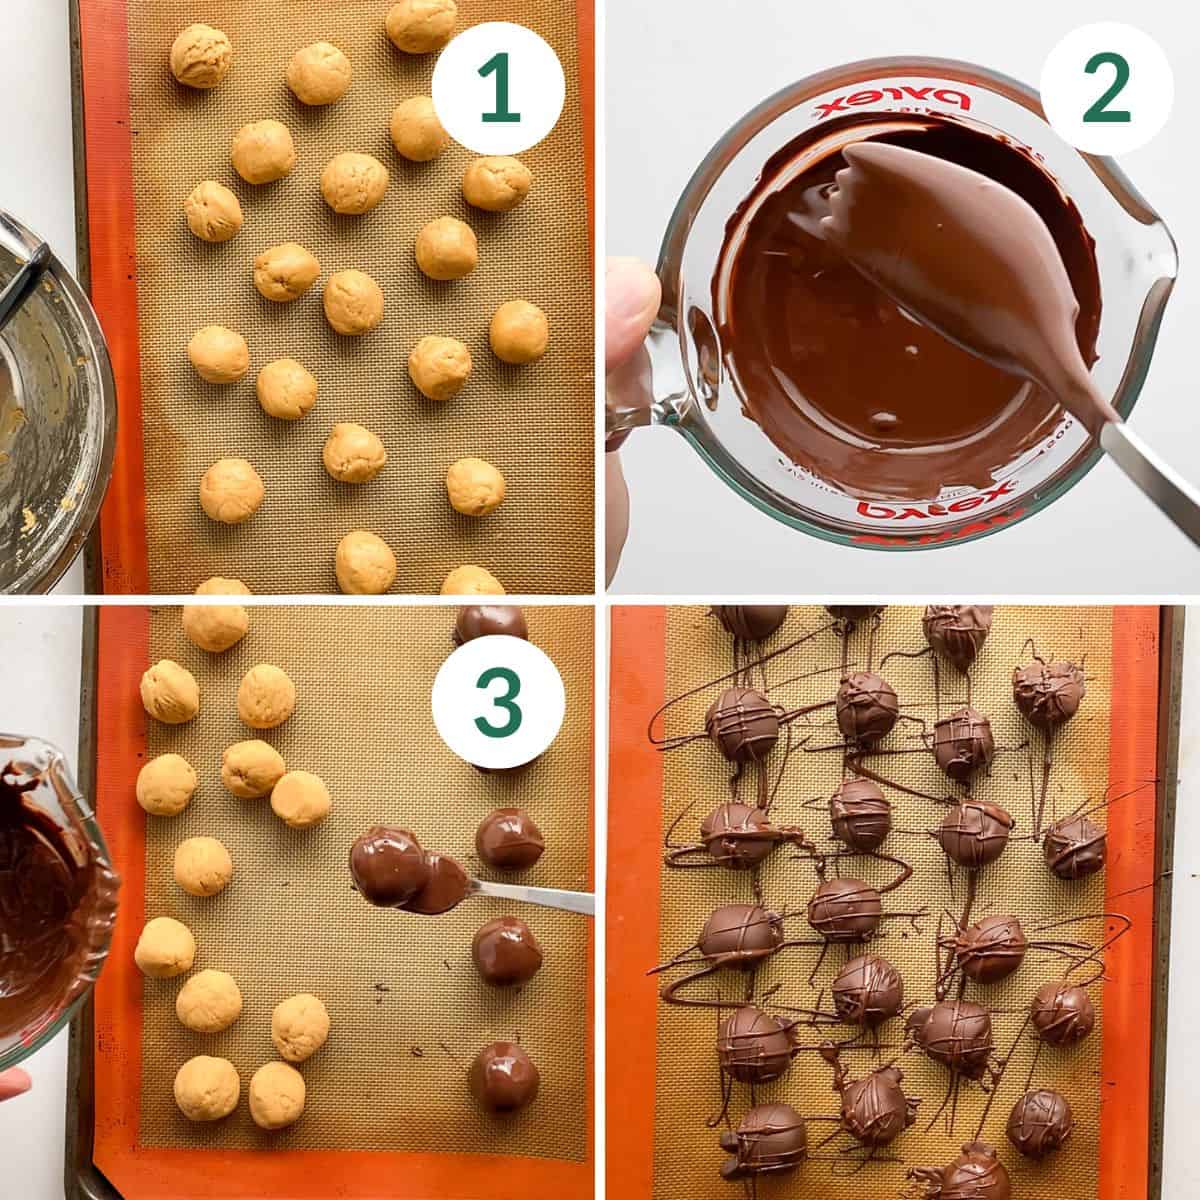 Step-by-step photos of making the peanut butter filling, melting the chocolate, dipping the filling in chocolate, and the finished truffles.